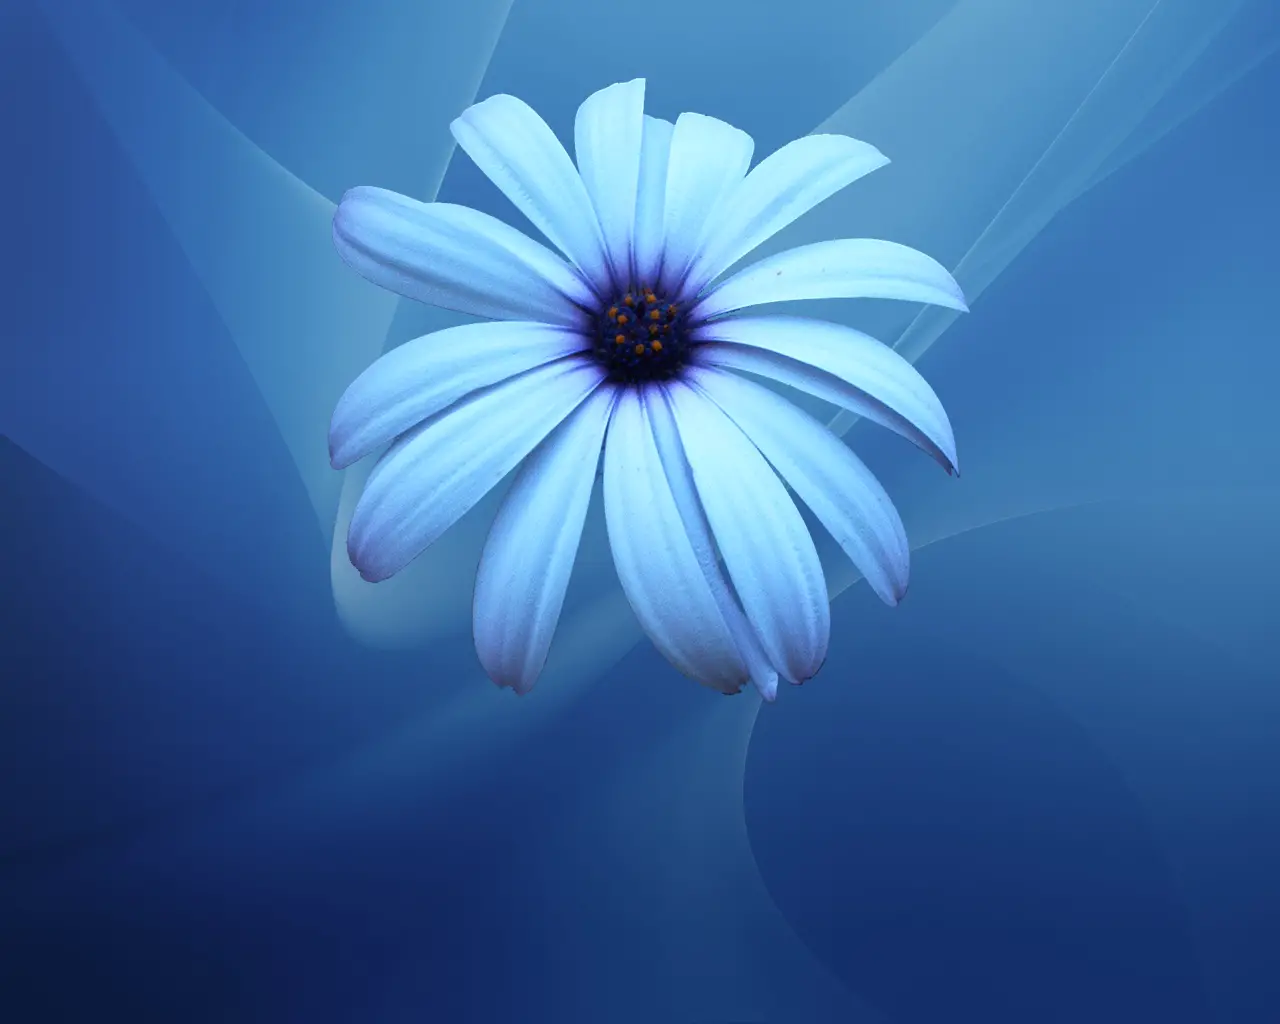 Blue Flowers Wallpapers